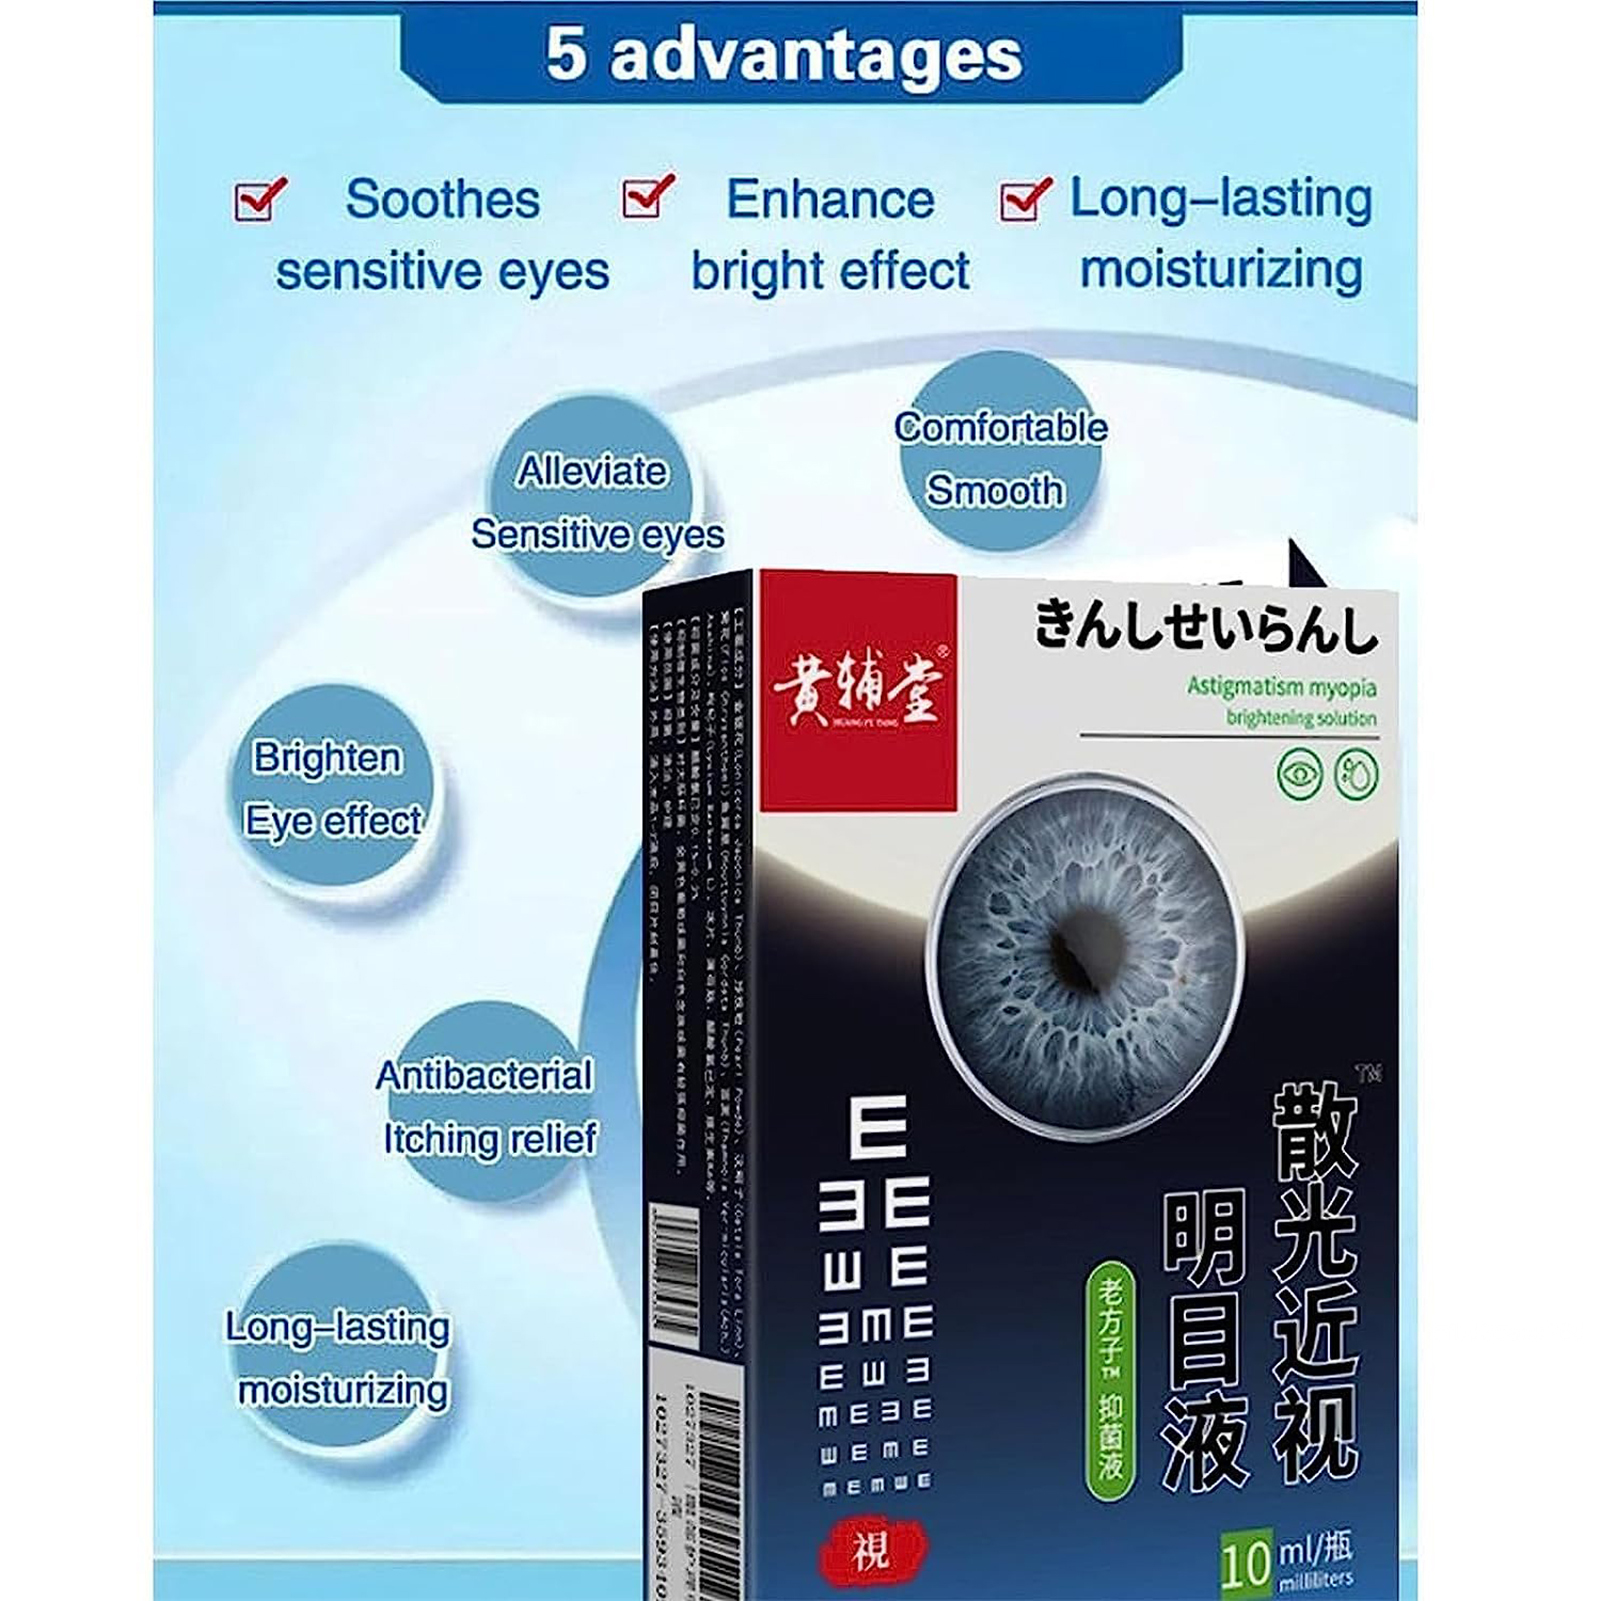 10ml Ultra Lubricant Eye Drops Moisturize and Soothe Irritated Eye Drops for Women Men Eye Relief LV-VN